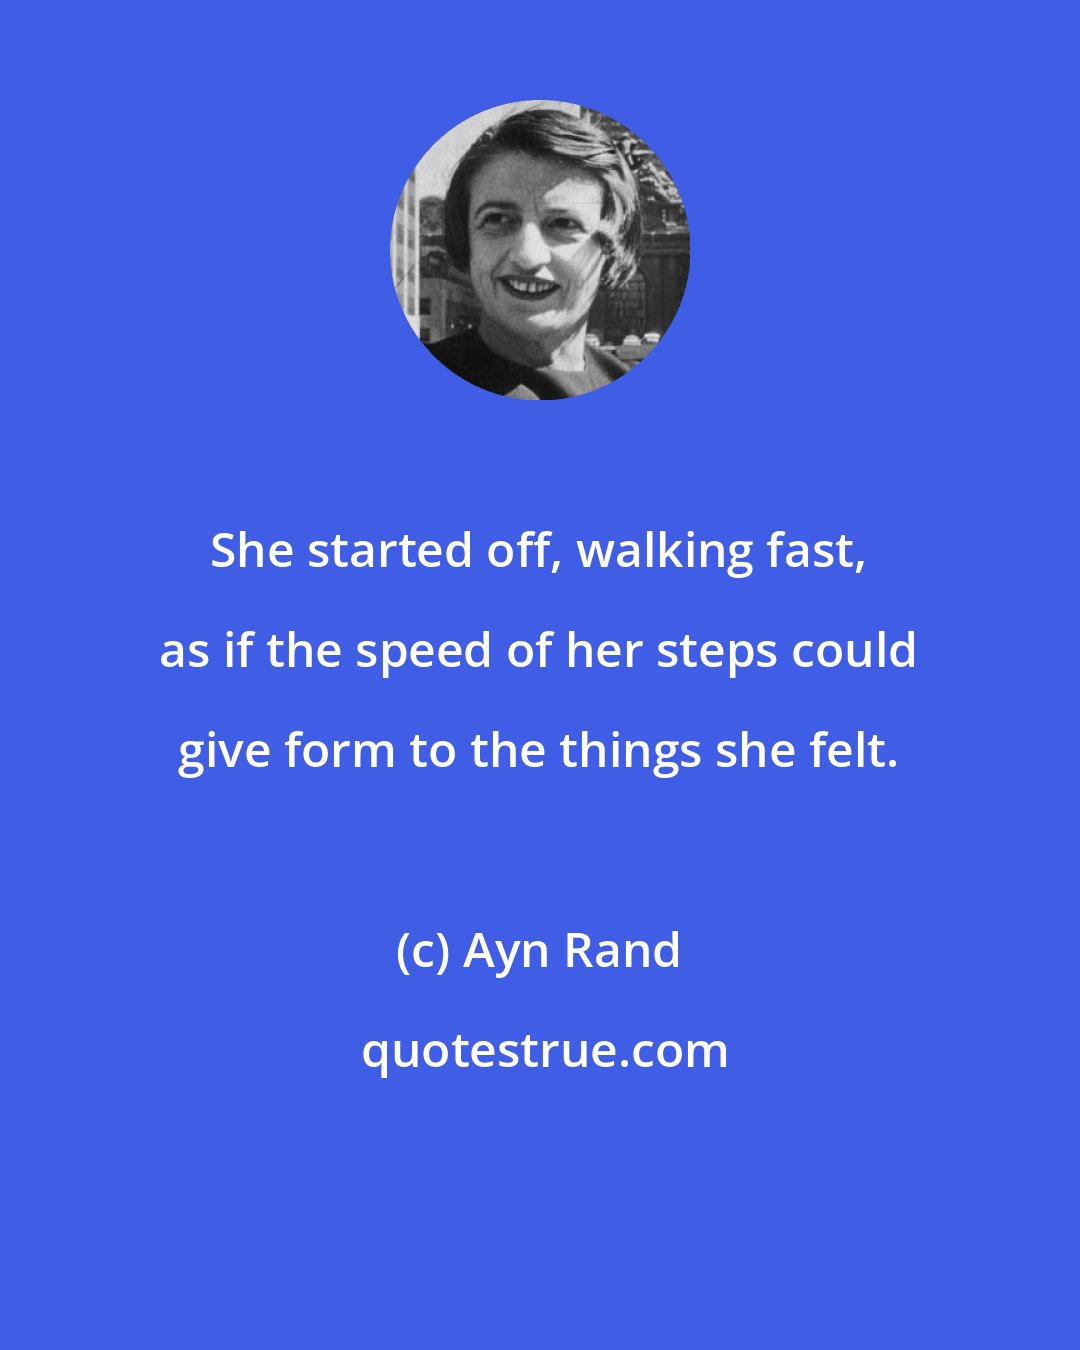 Ayn Rand: She started off, walking fast, as if the speed of her steps could give form to the things she felt.